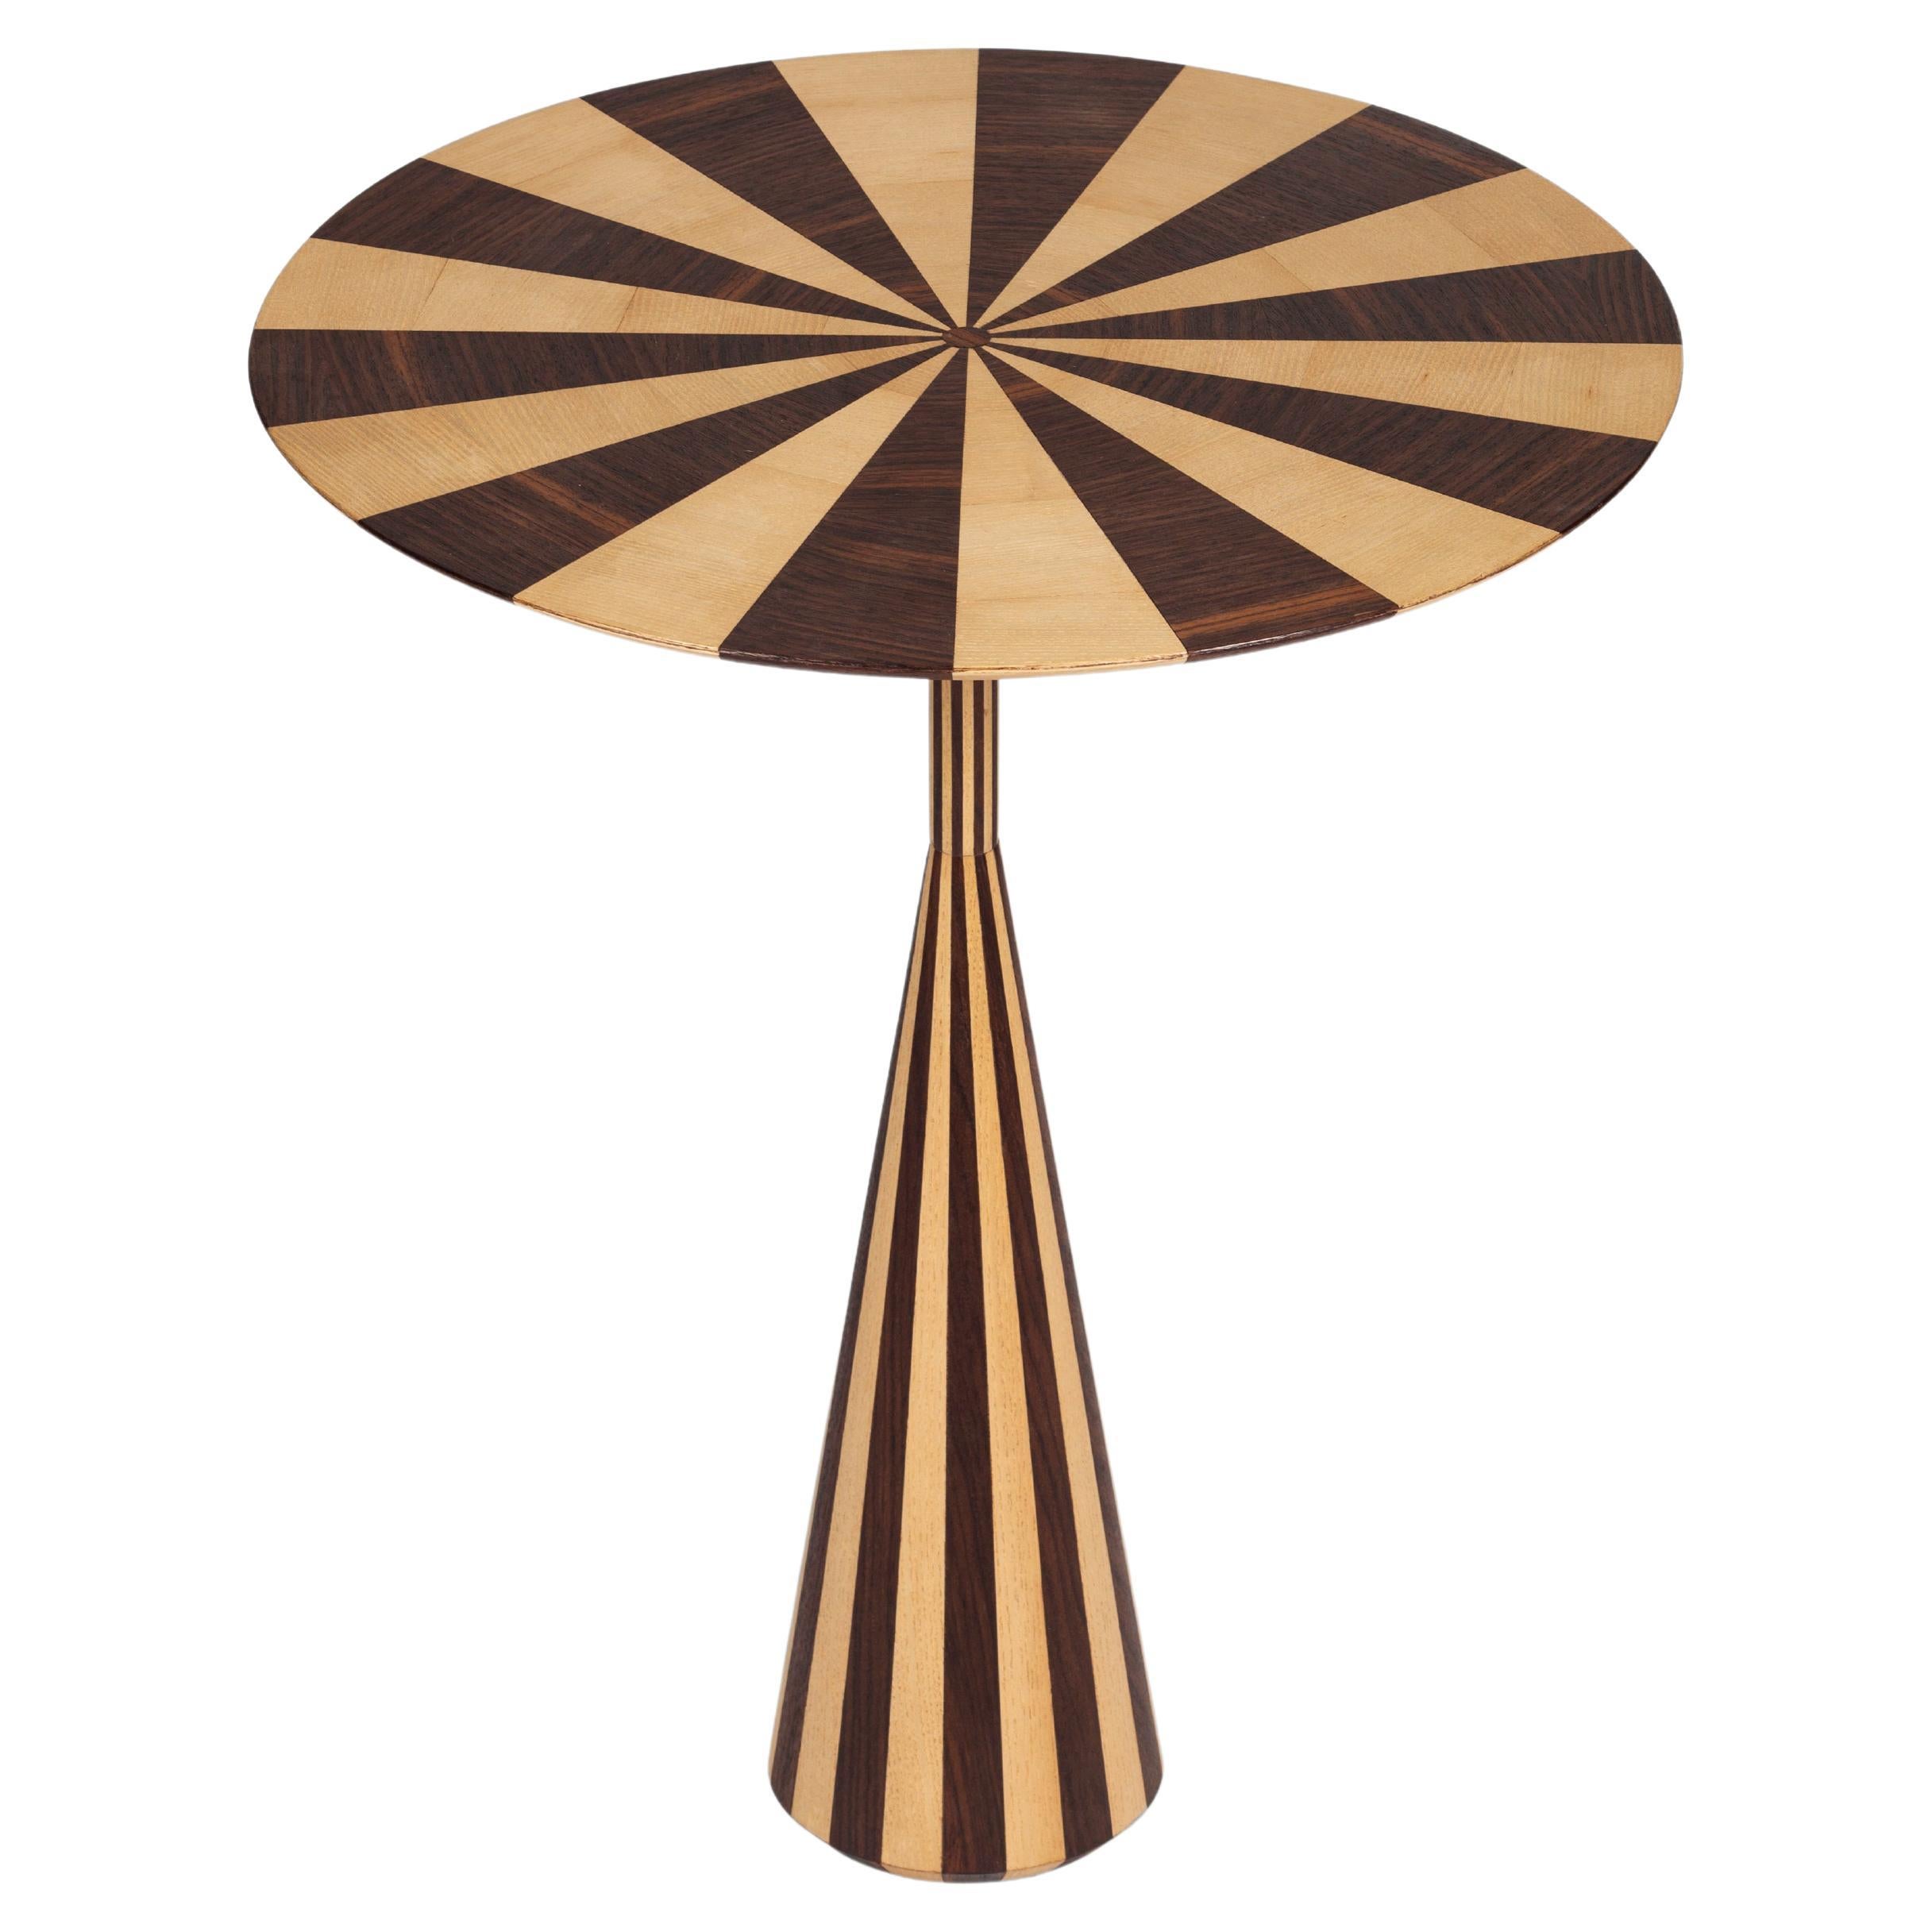 21st Century "Circensi" Inlaid Tea Table by Gum Design & Hebanon, Made in Italy For Sale